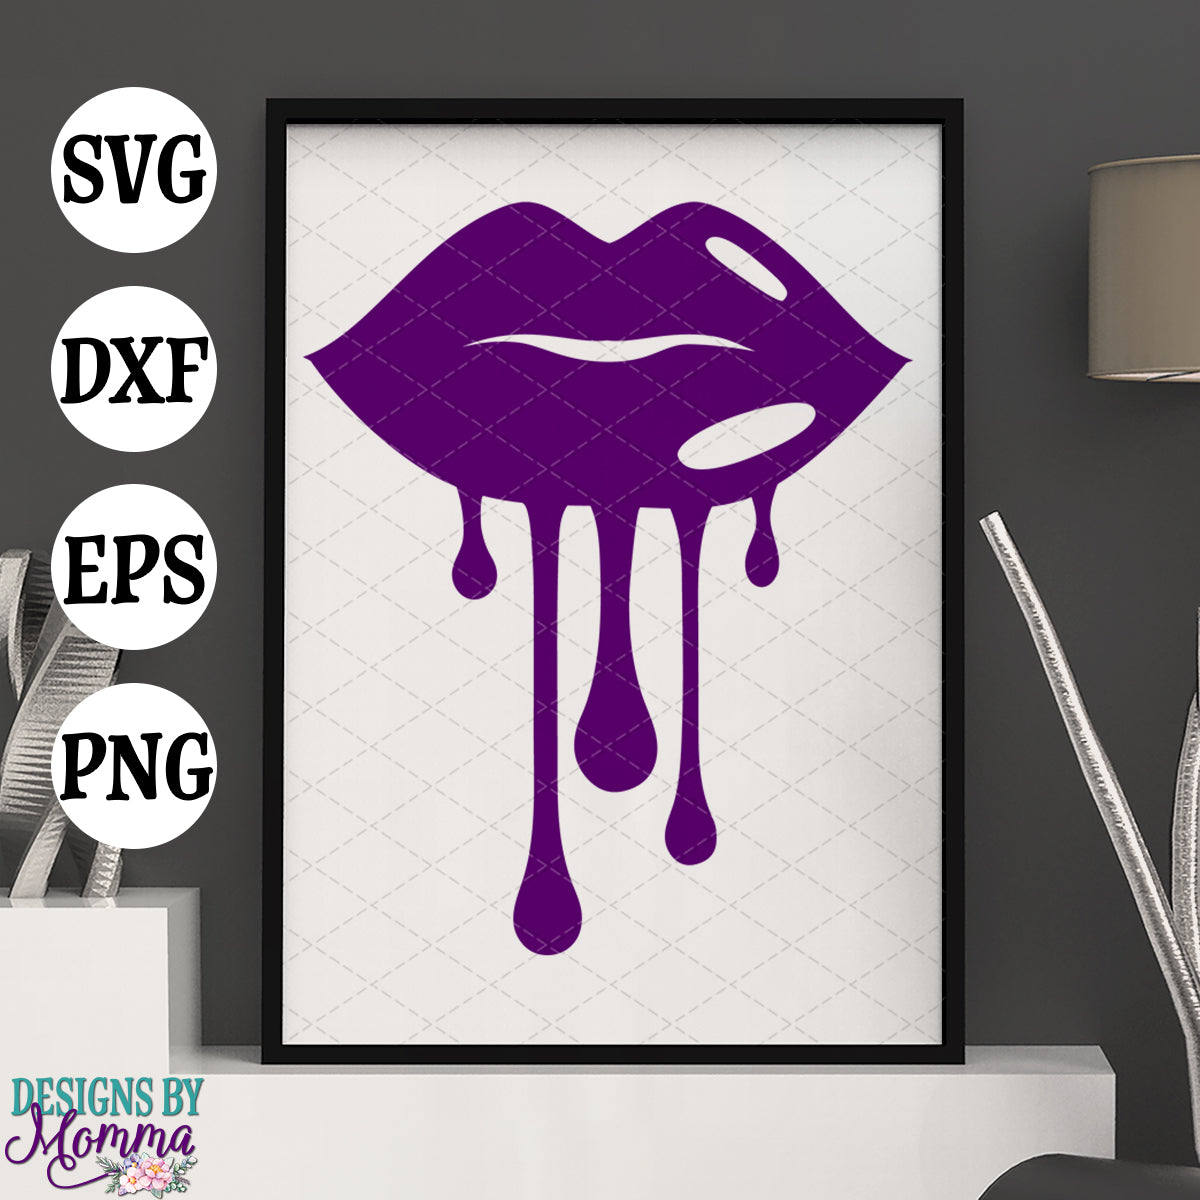 Download Dripping Lips Single SVG DXF EPS PNG - Designs by Momma